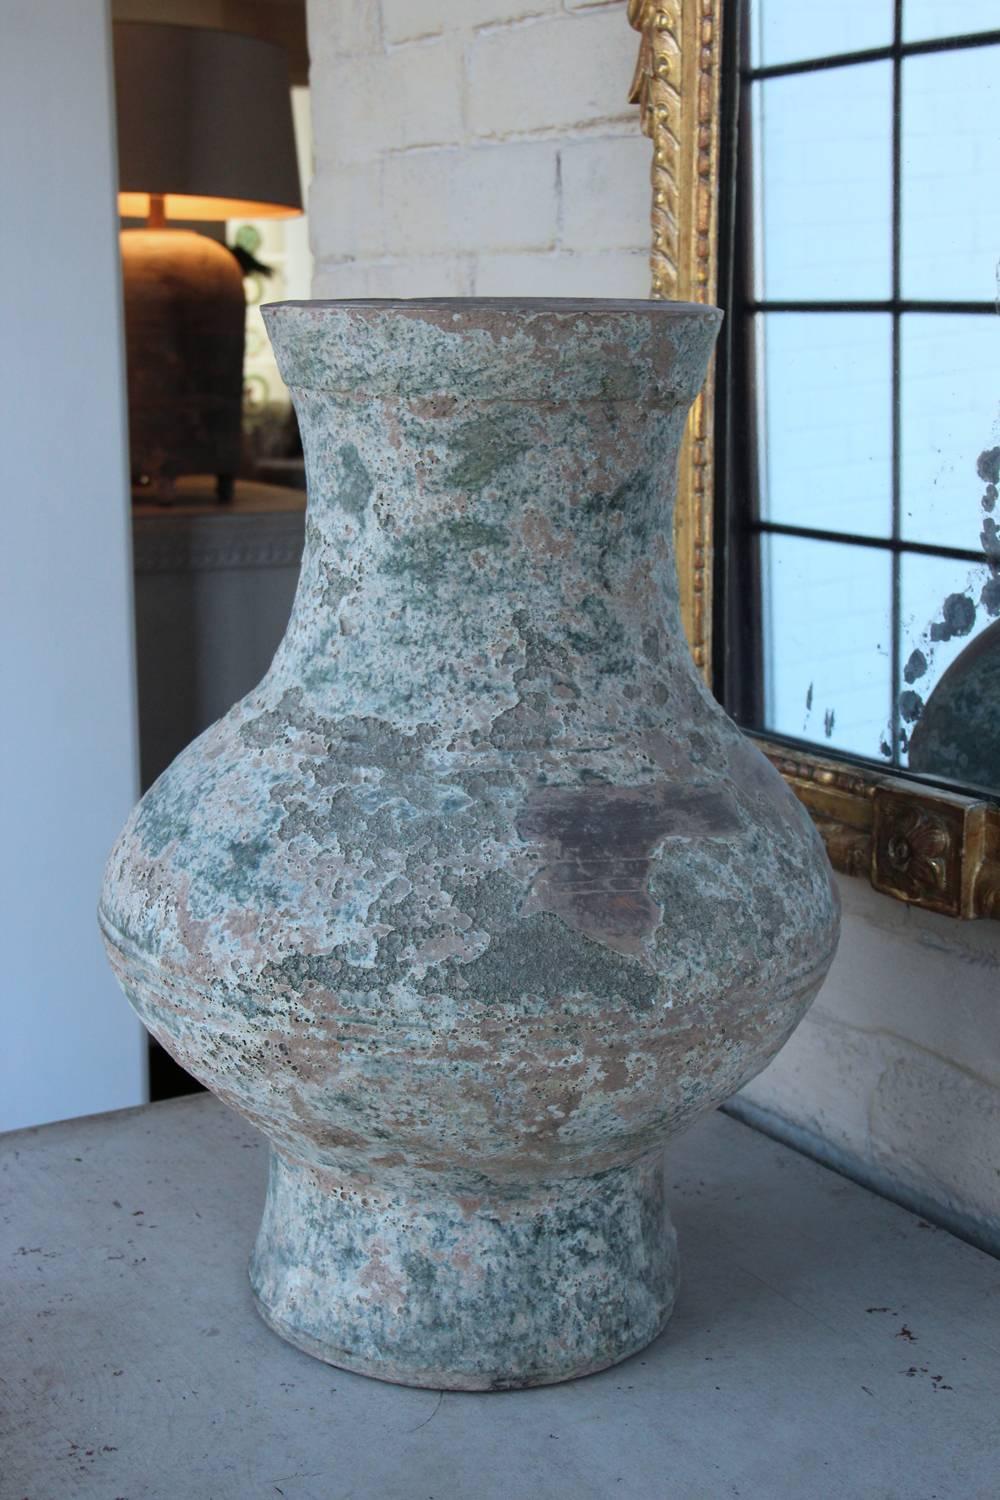 To view more of our inventory, visit Maison & Co.'s 1stdibs storefront.  This is an exceptional Chinese glazed terra cotta vase or jar, known as 'Hu' from the Han dynasty period used to store wine, oil, and grain. There are incised rings around the